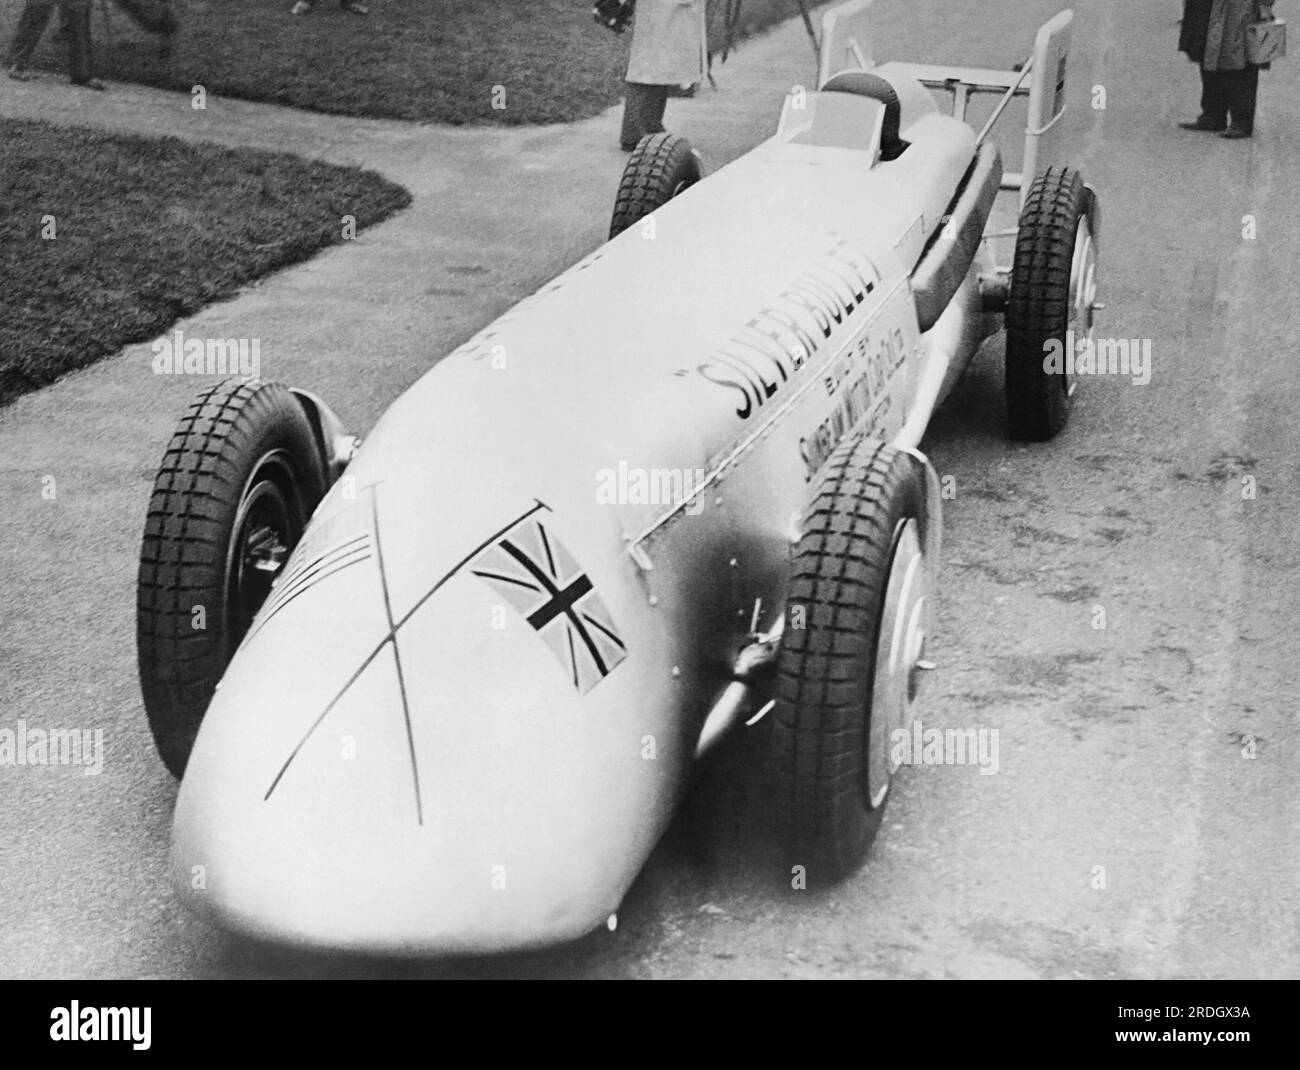 United States:  1930 The Silver Bullet car in which racer Kaye Don will attempt to beat Seagrave's record speed of 231 mph at Daytona Beach. Stock Photo